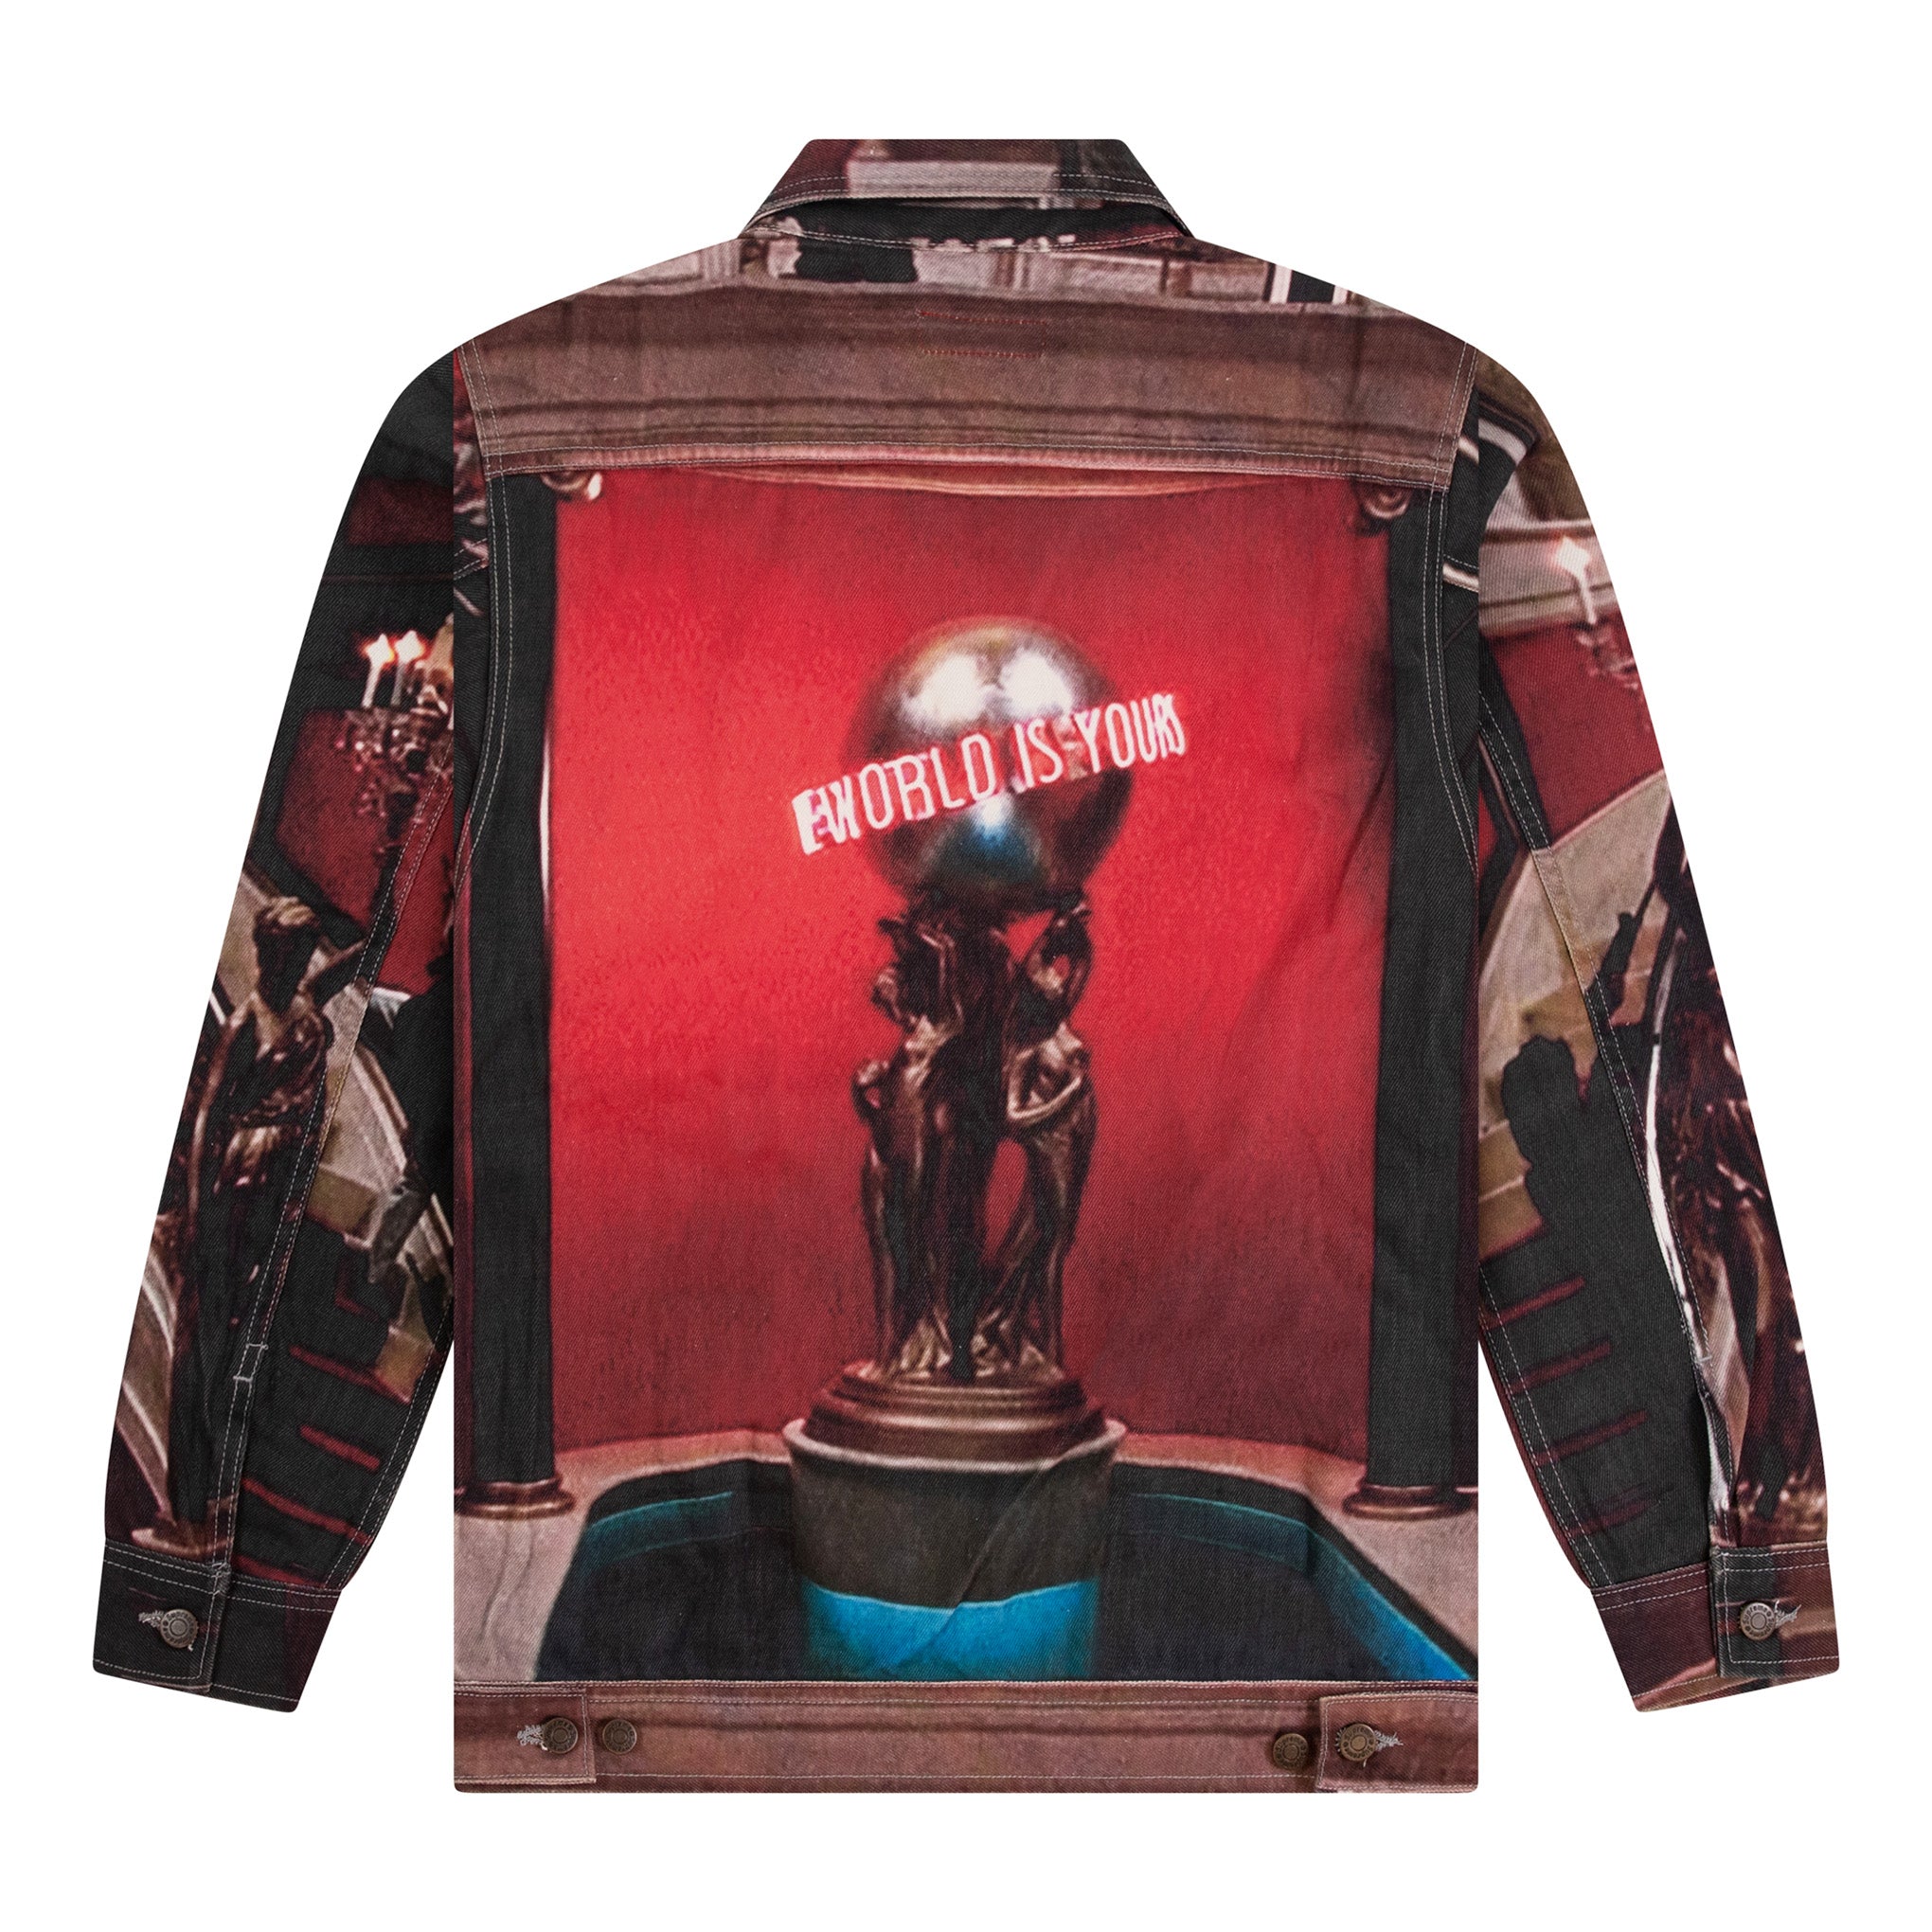 Supreme Scarface Trucker Jacket World is yours Denim Red Size M